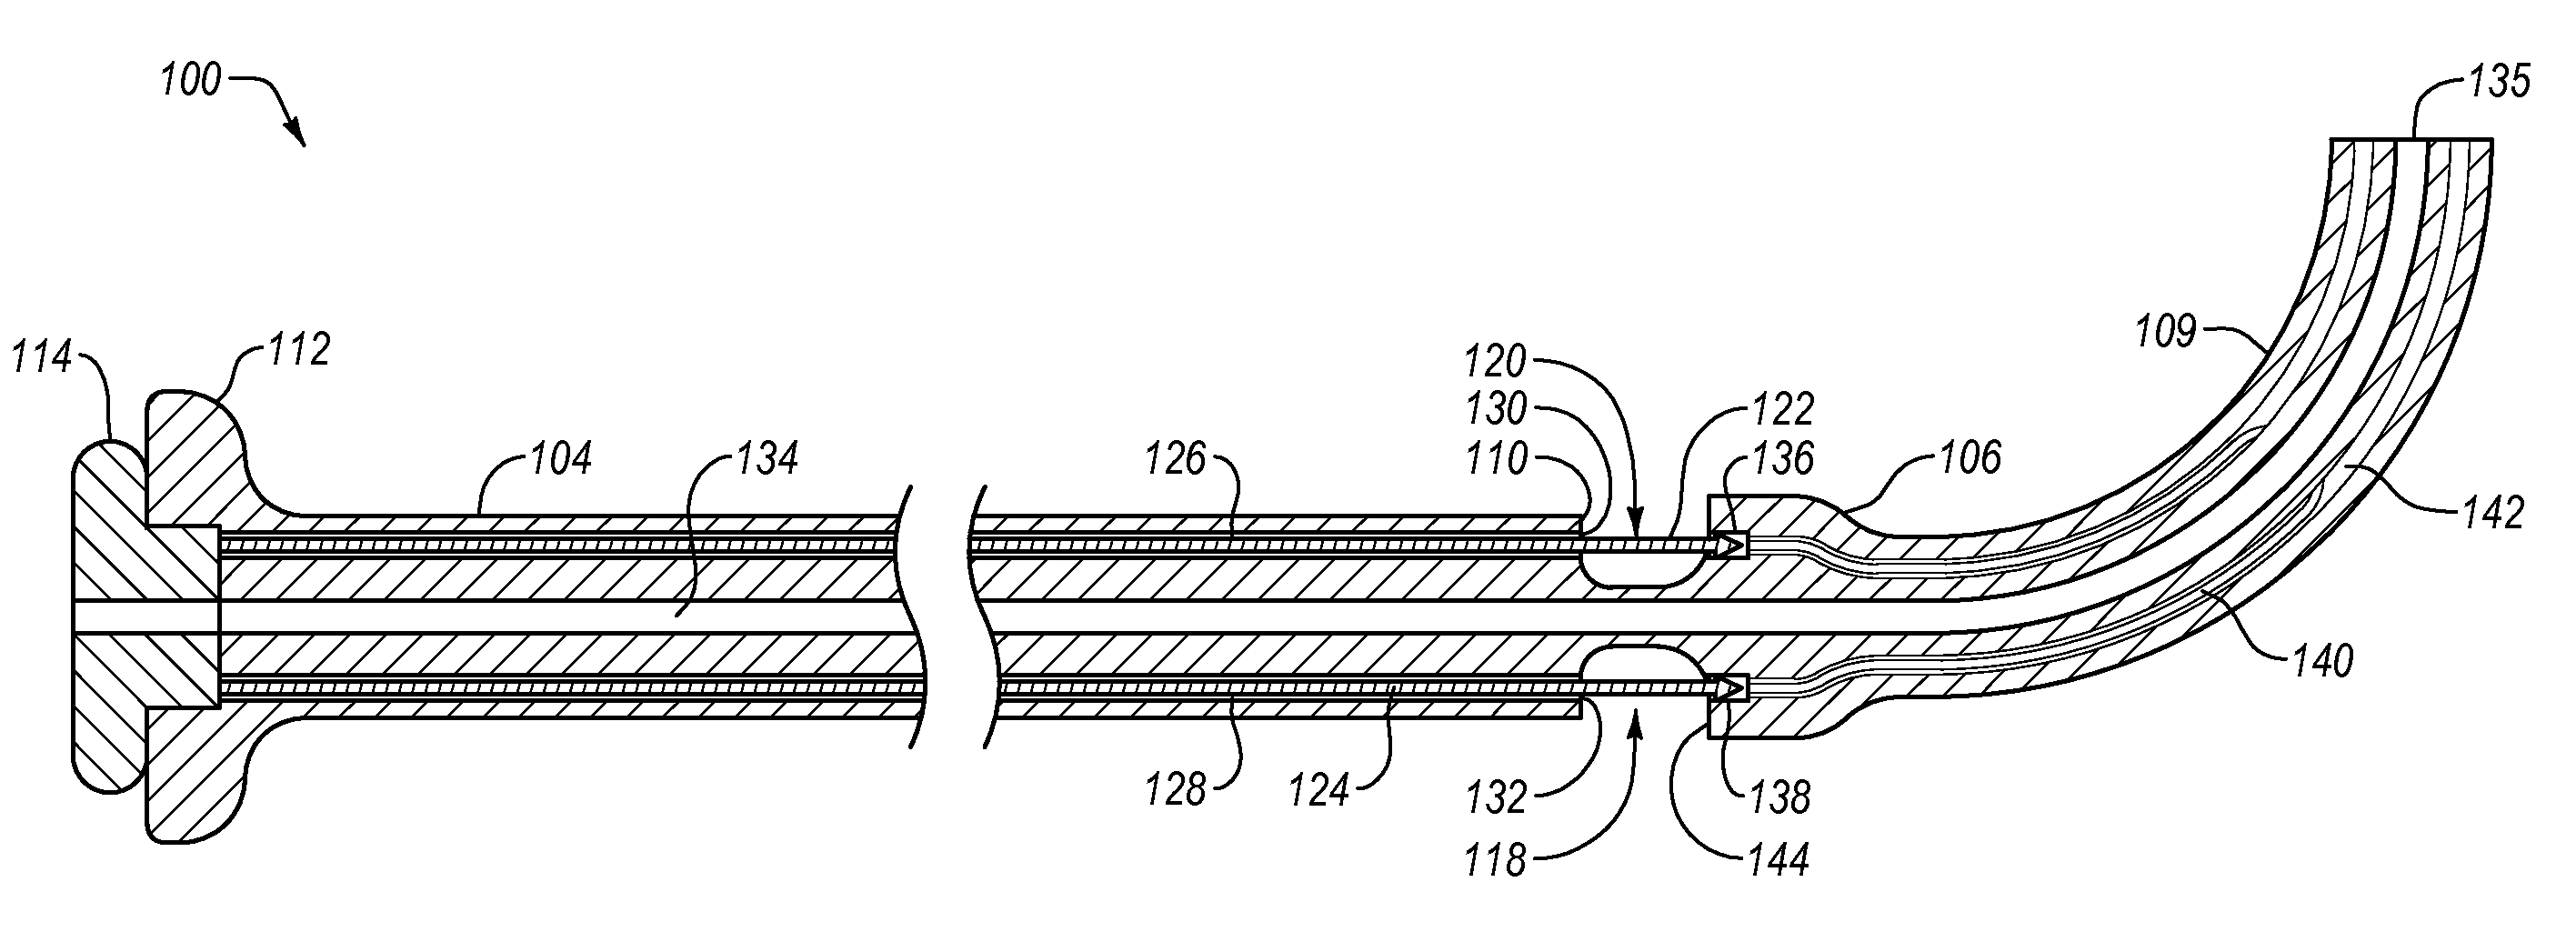 Suturing devices and methods